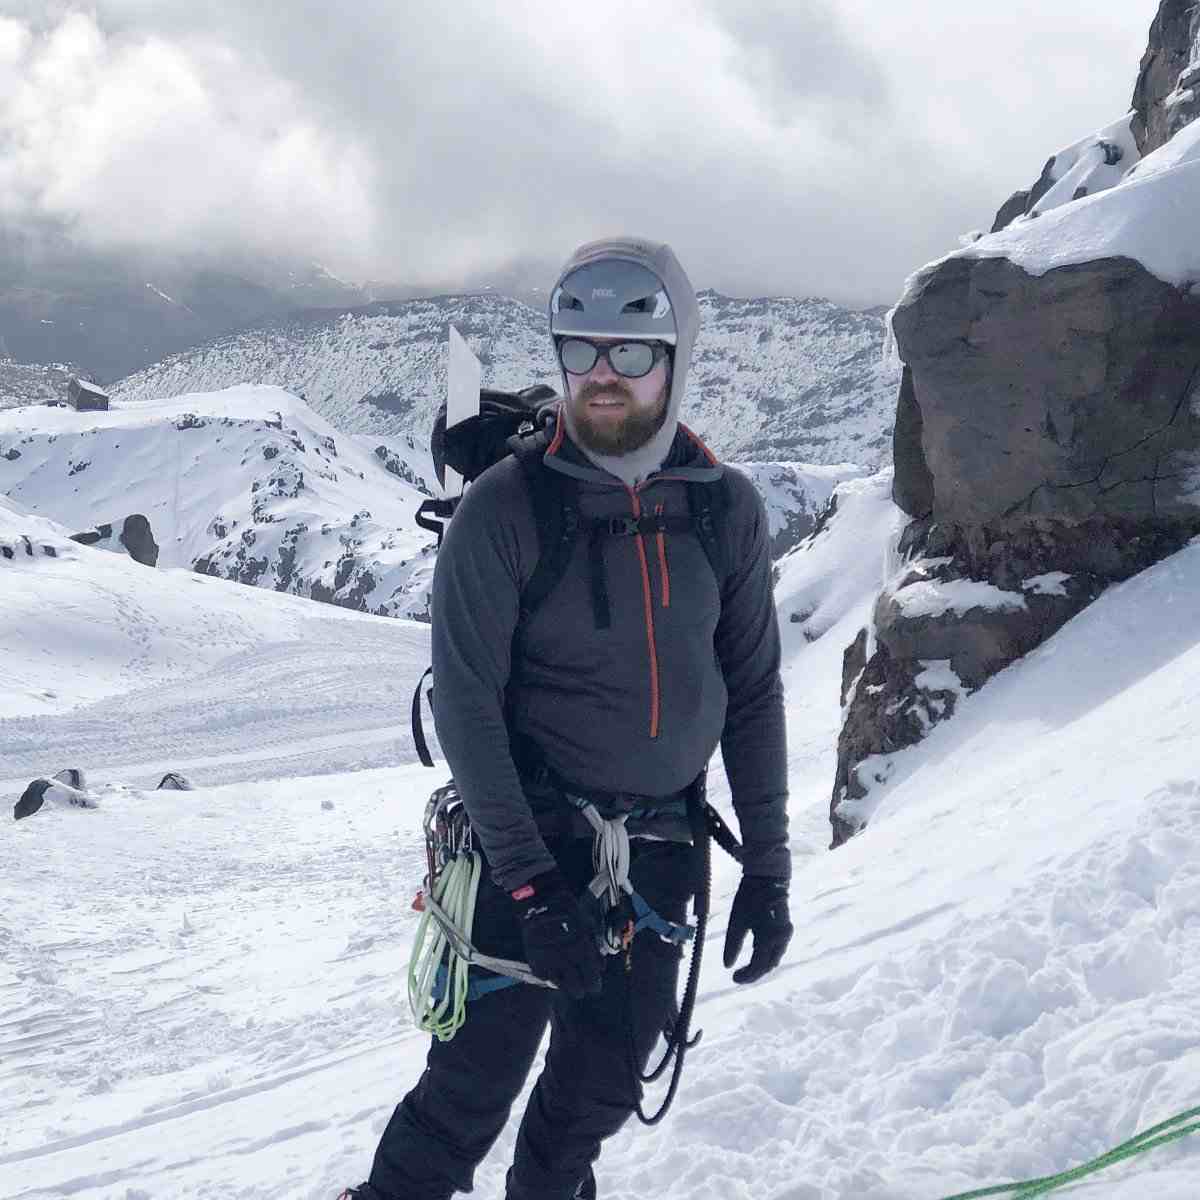 Bearded and helmeted climber in sunglasses with alpine equipment and snowy background